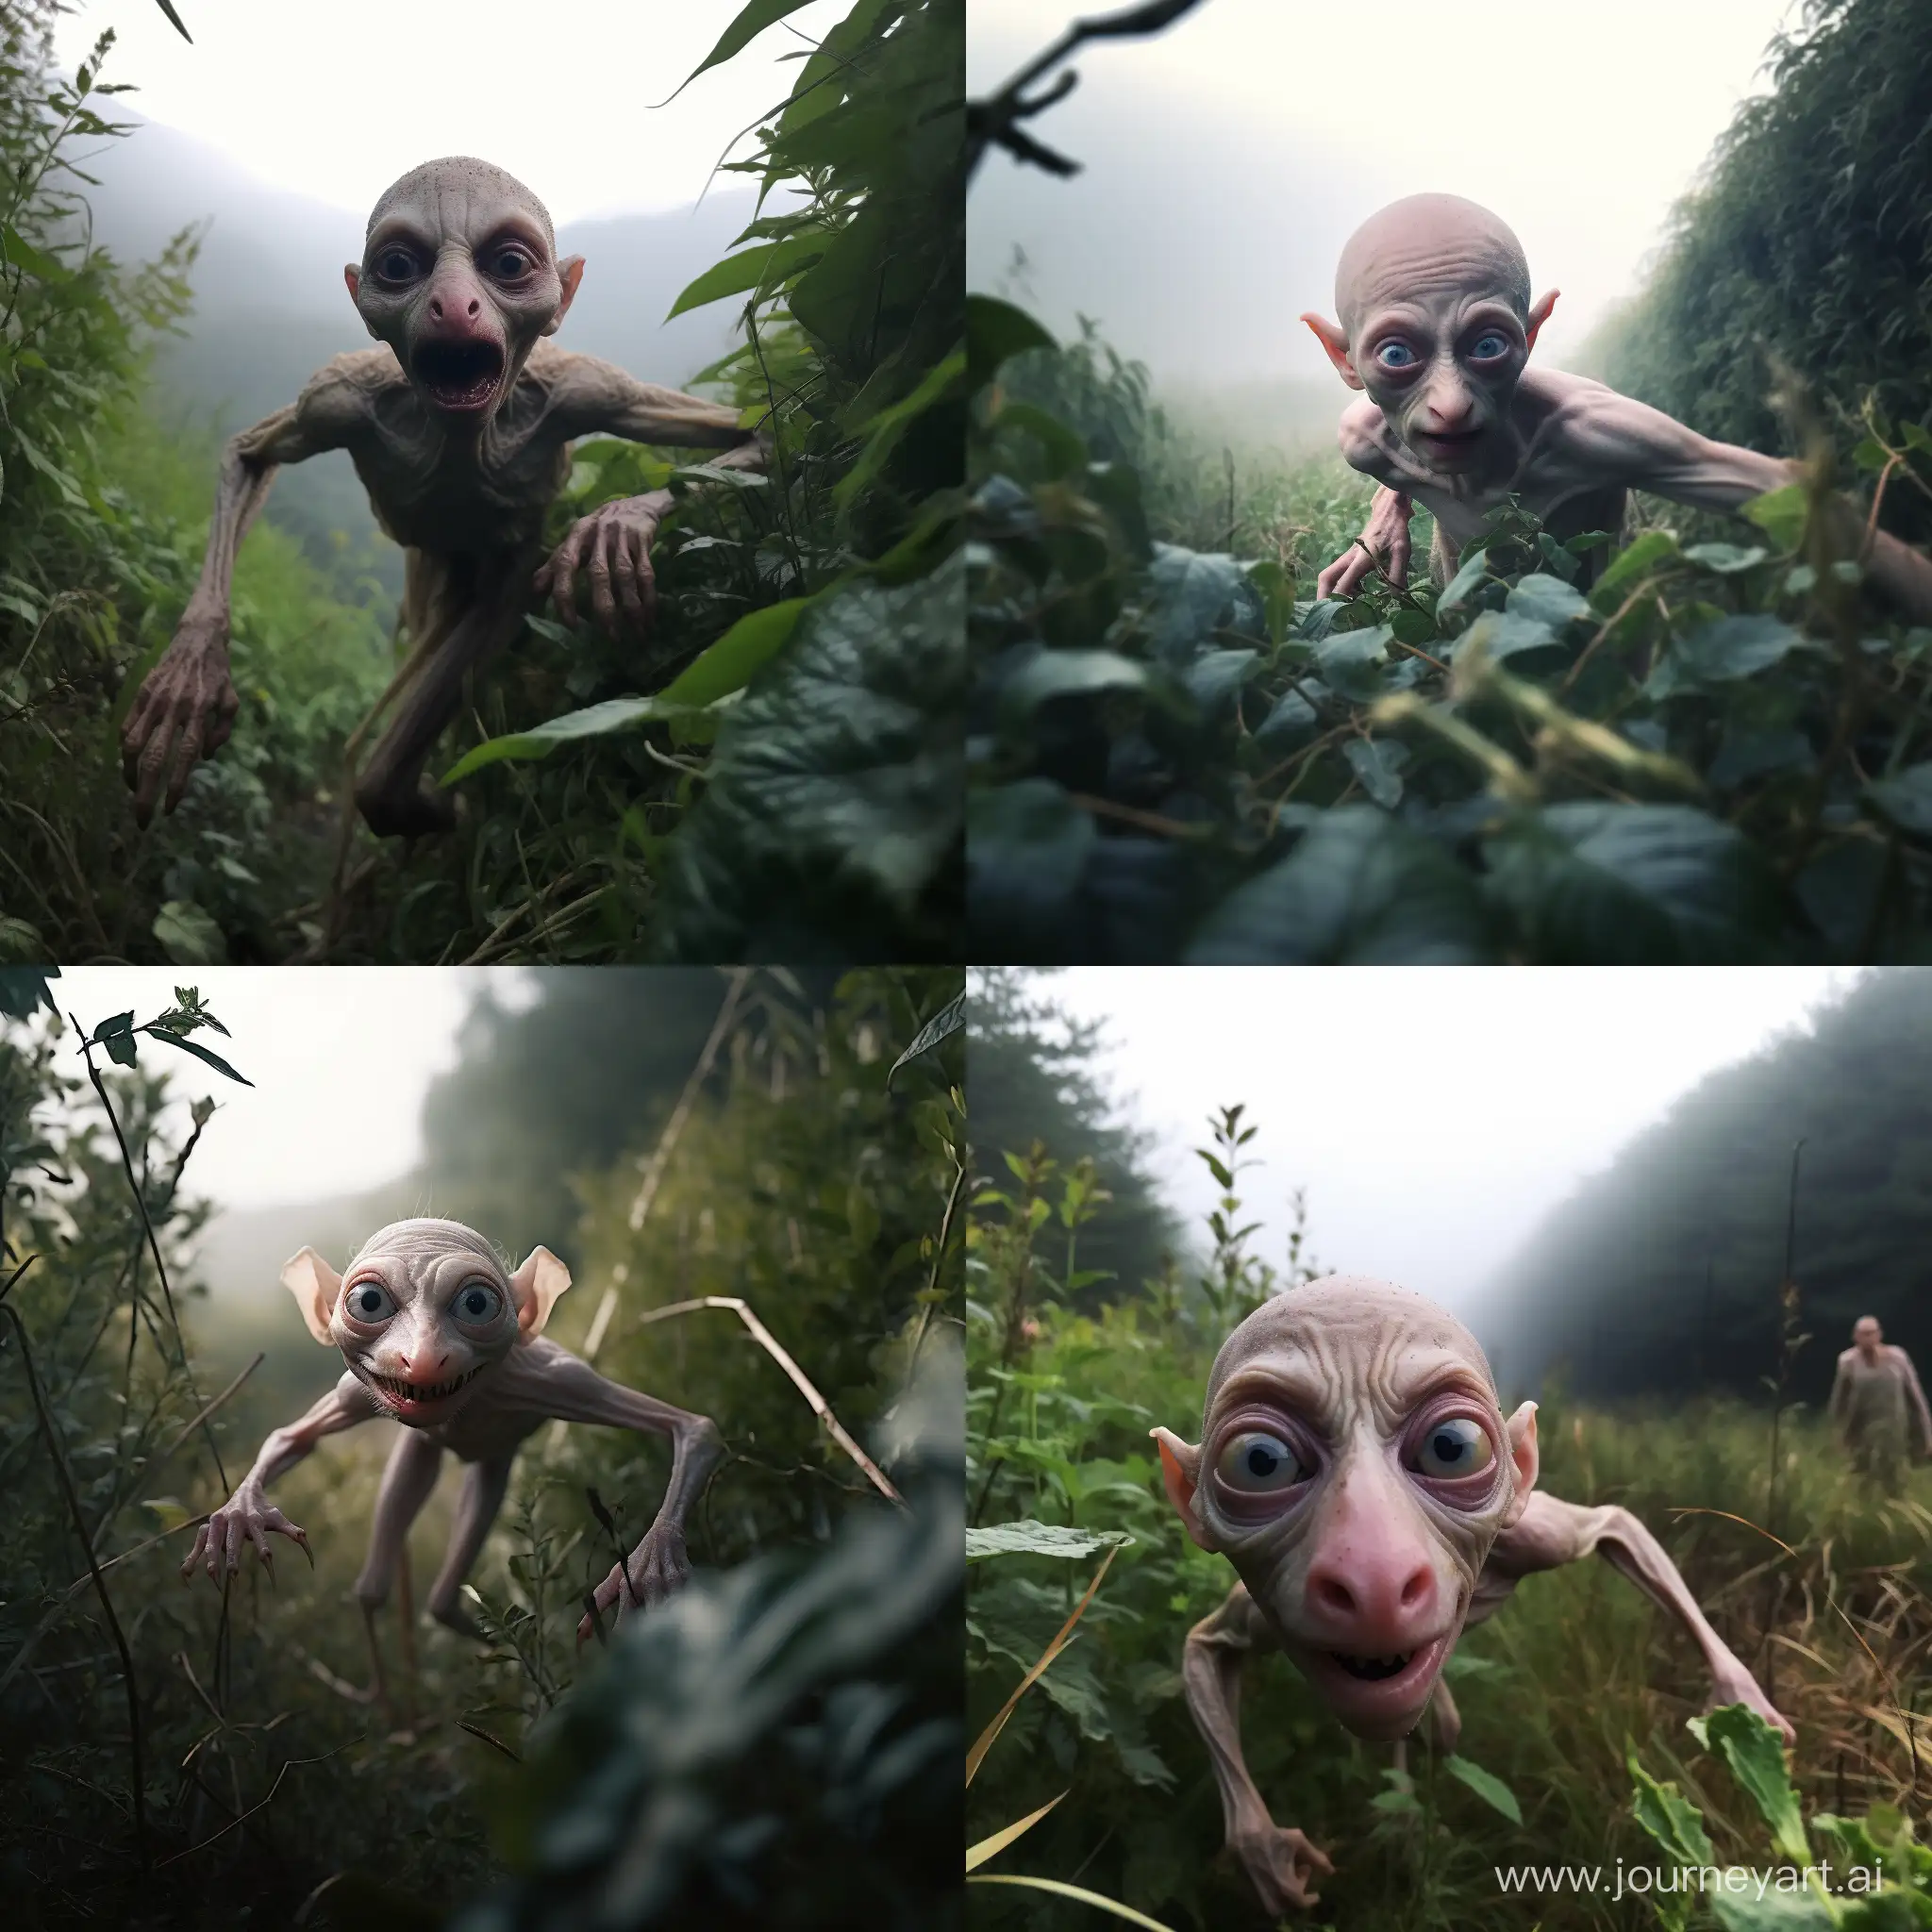 Mysterious-Encounter-Dobby-the-Insane-Cryptid-Captured-in-Eerie-Fog